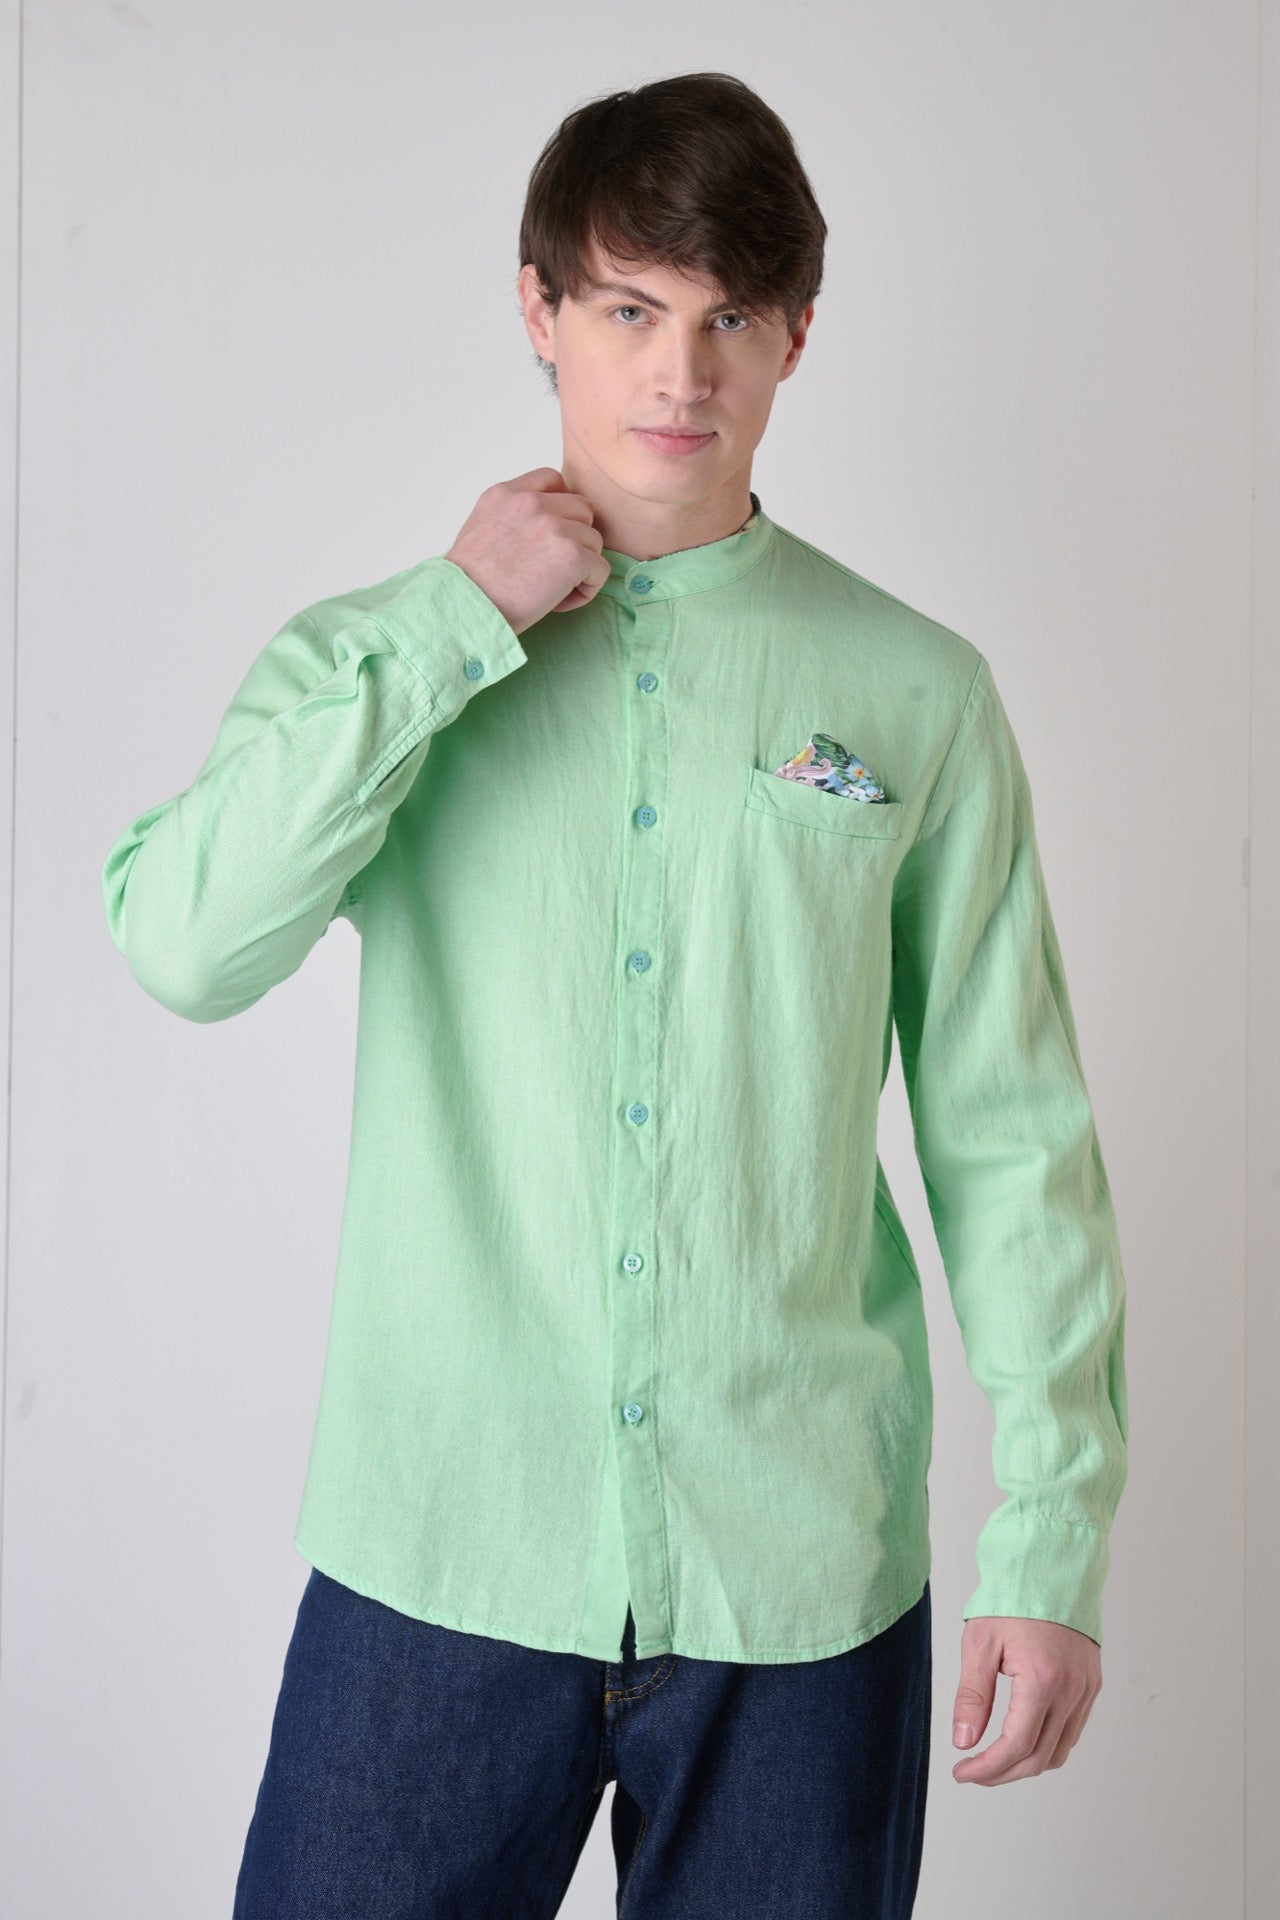 Korean Tailored Shirt in Mint Green Linen with Pocket Square, Interior and Cuffs in V2 Fabric